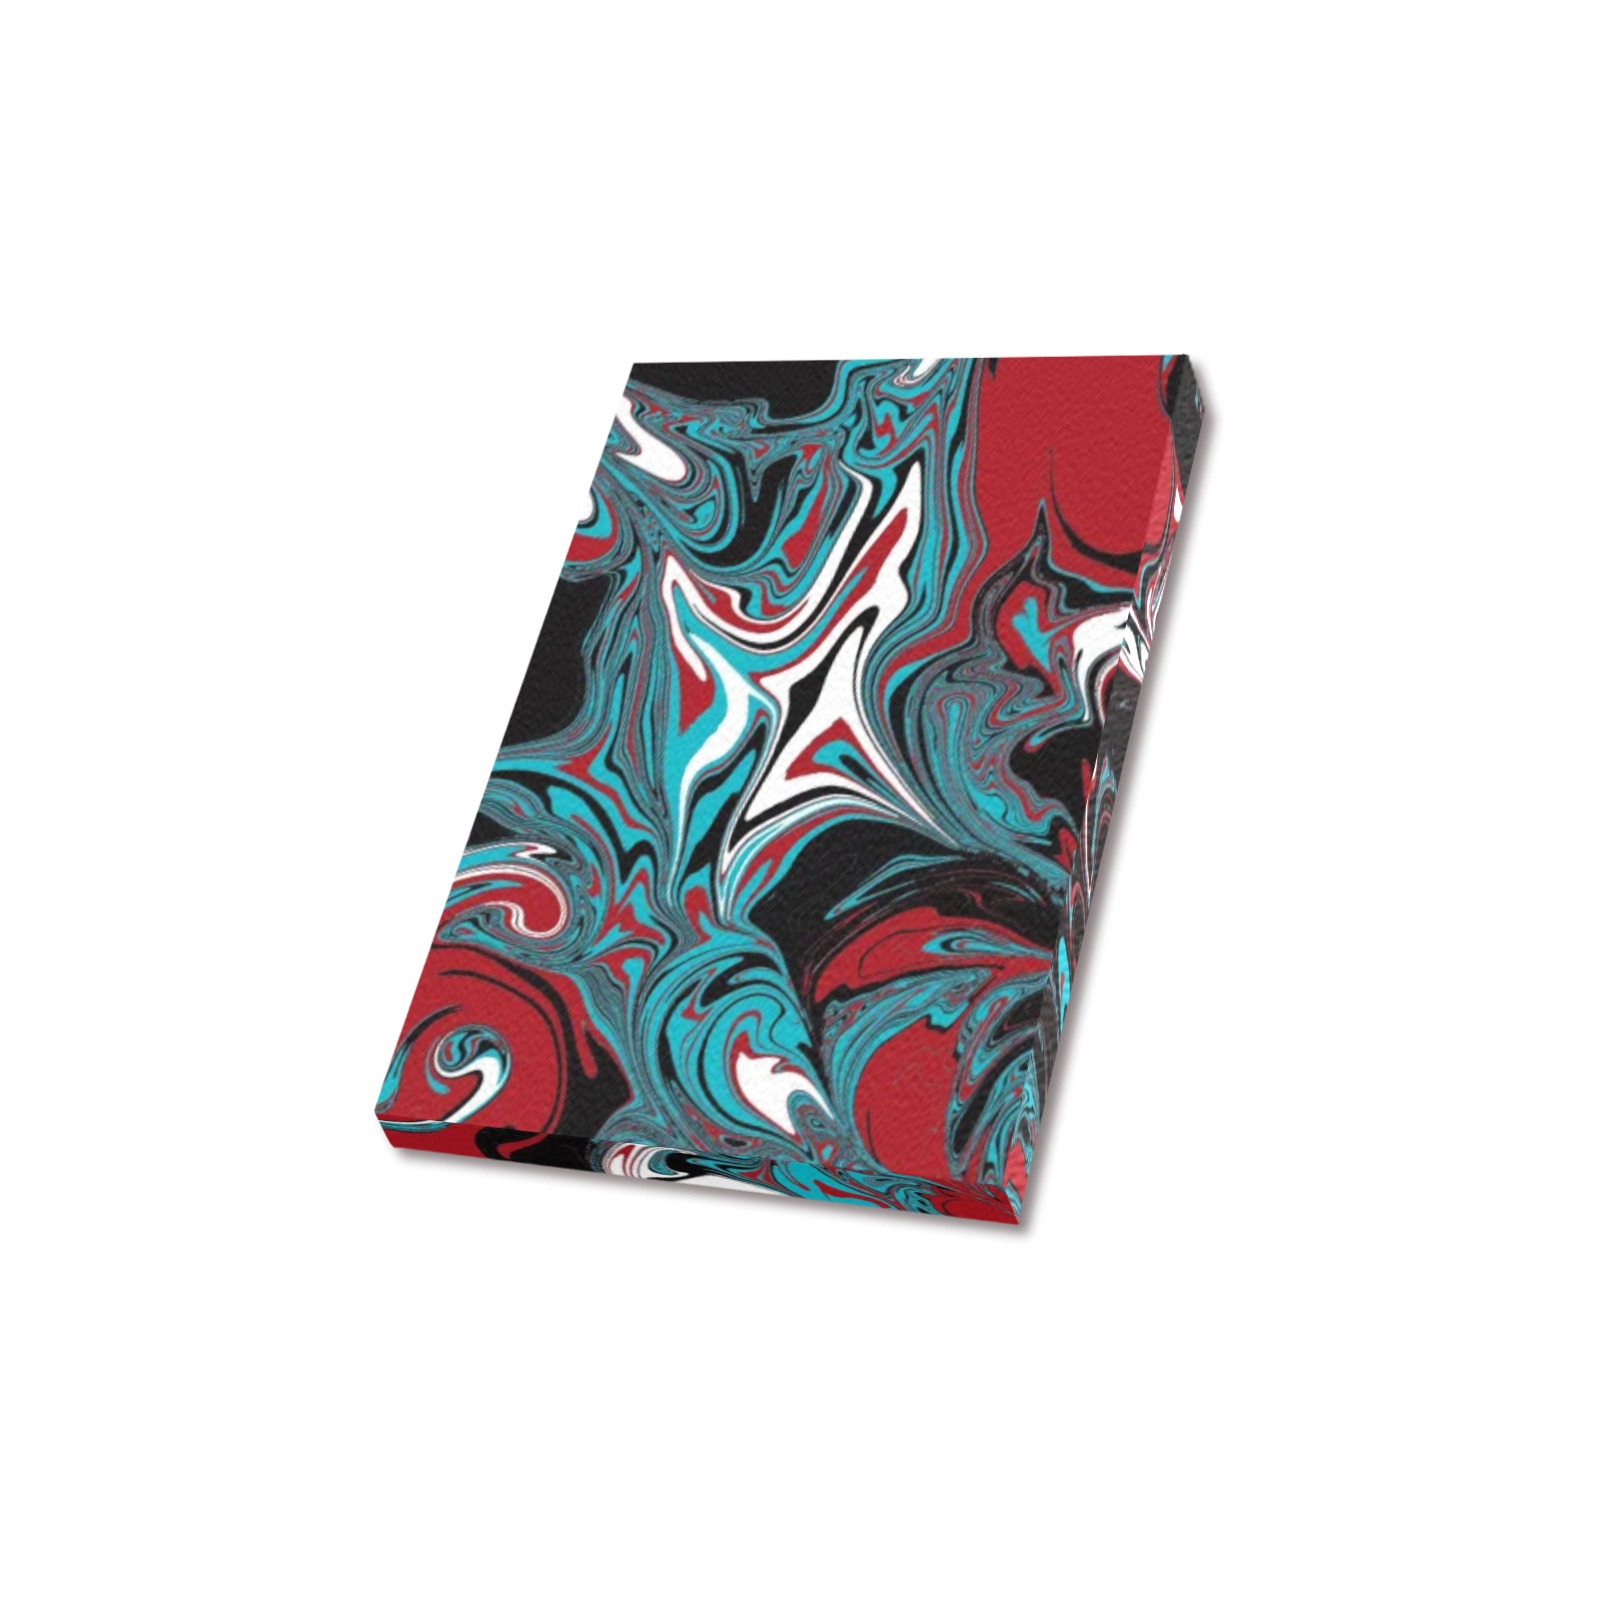 Dark Wave of Colors Upgraded Canvas Print 5"x7"